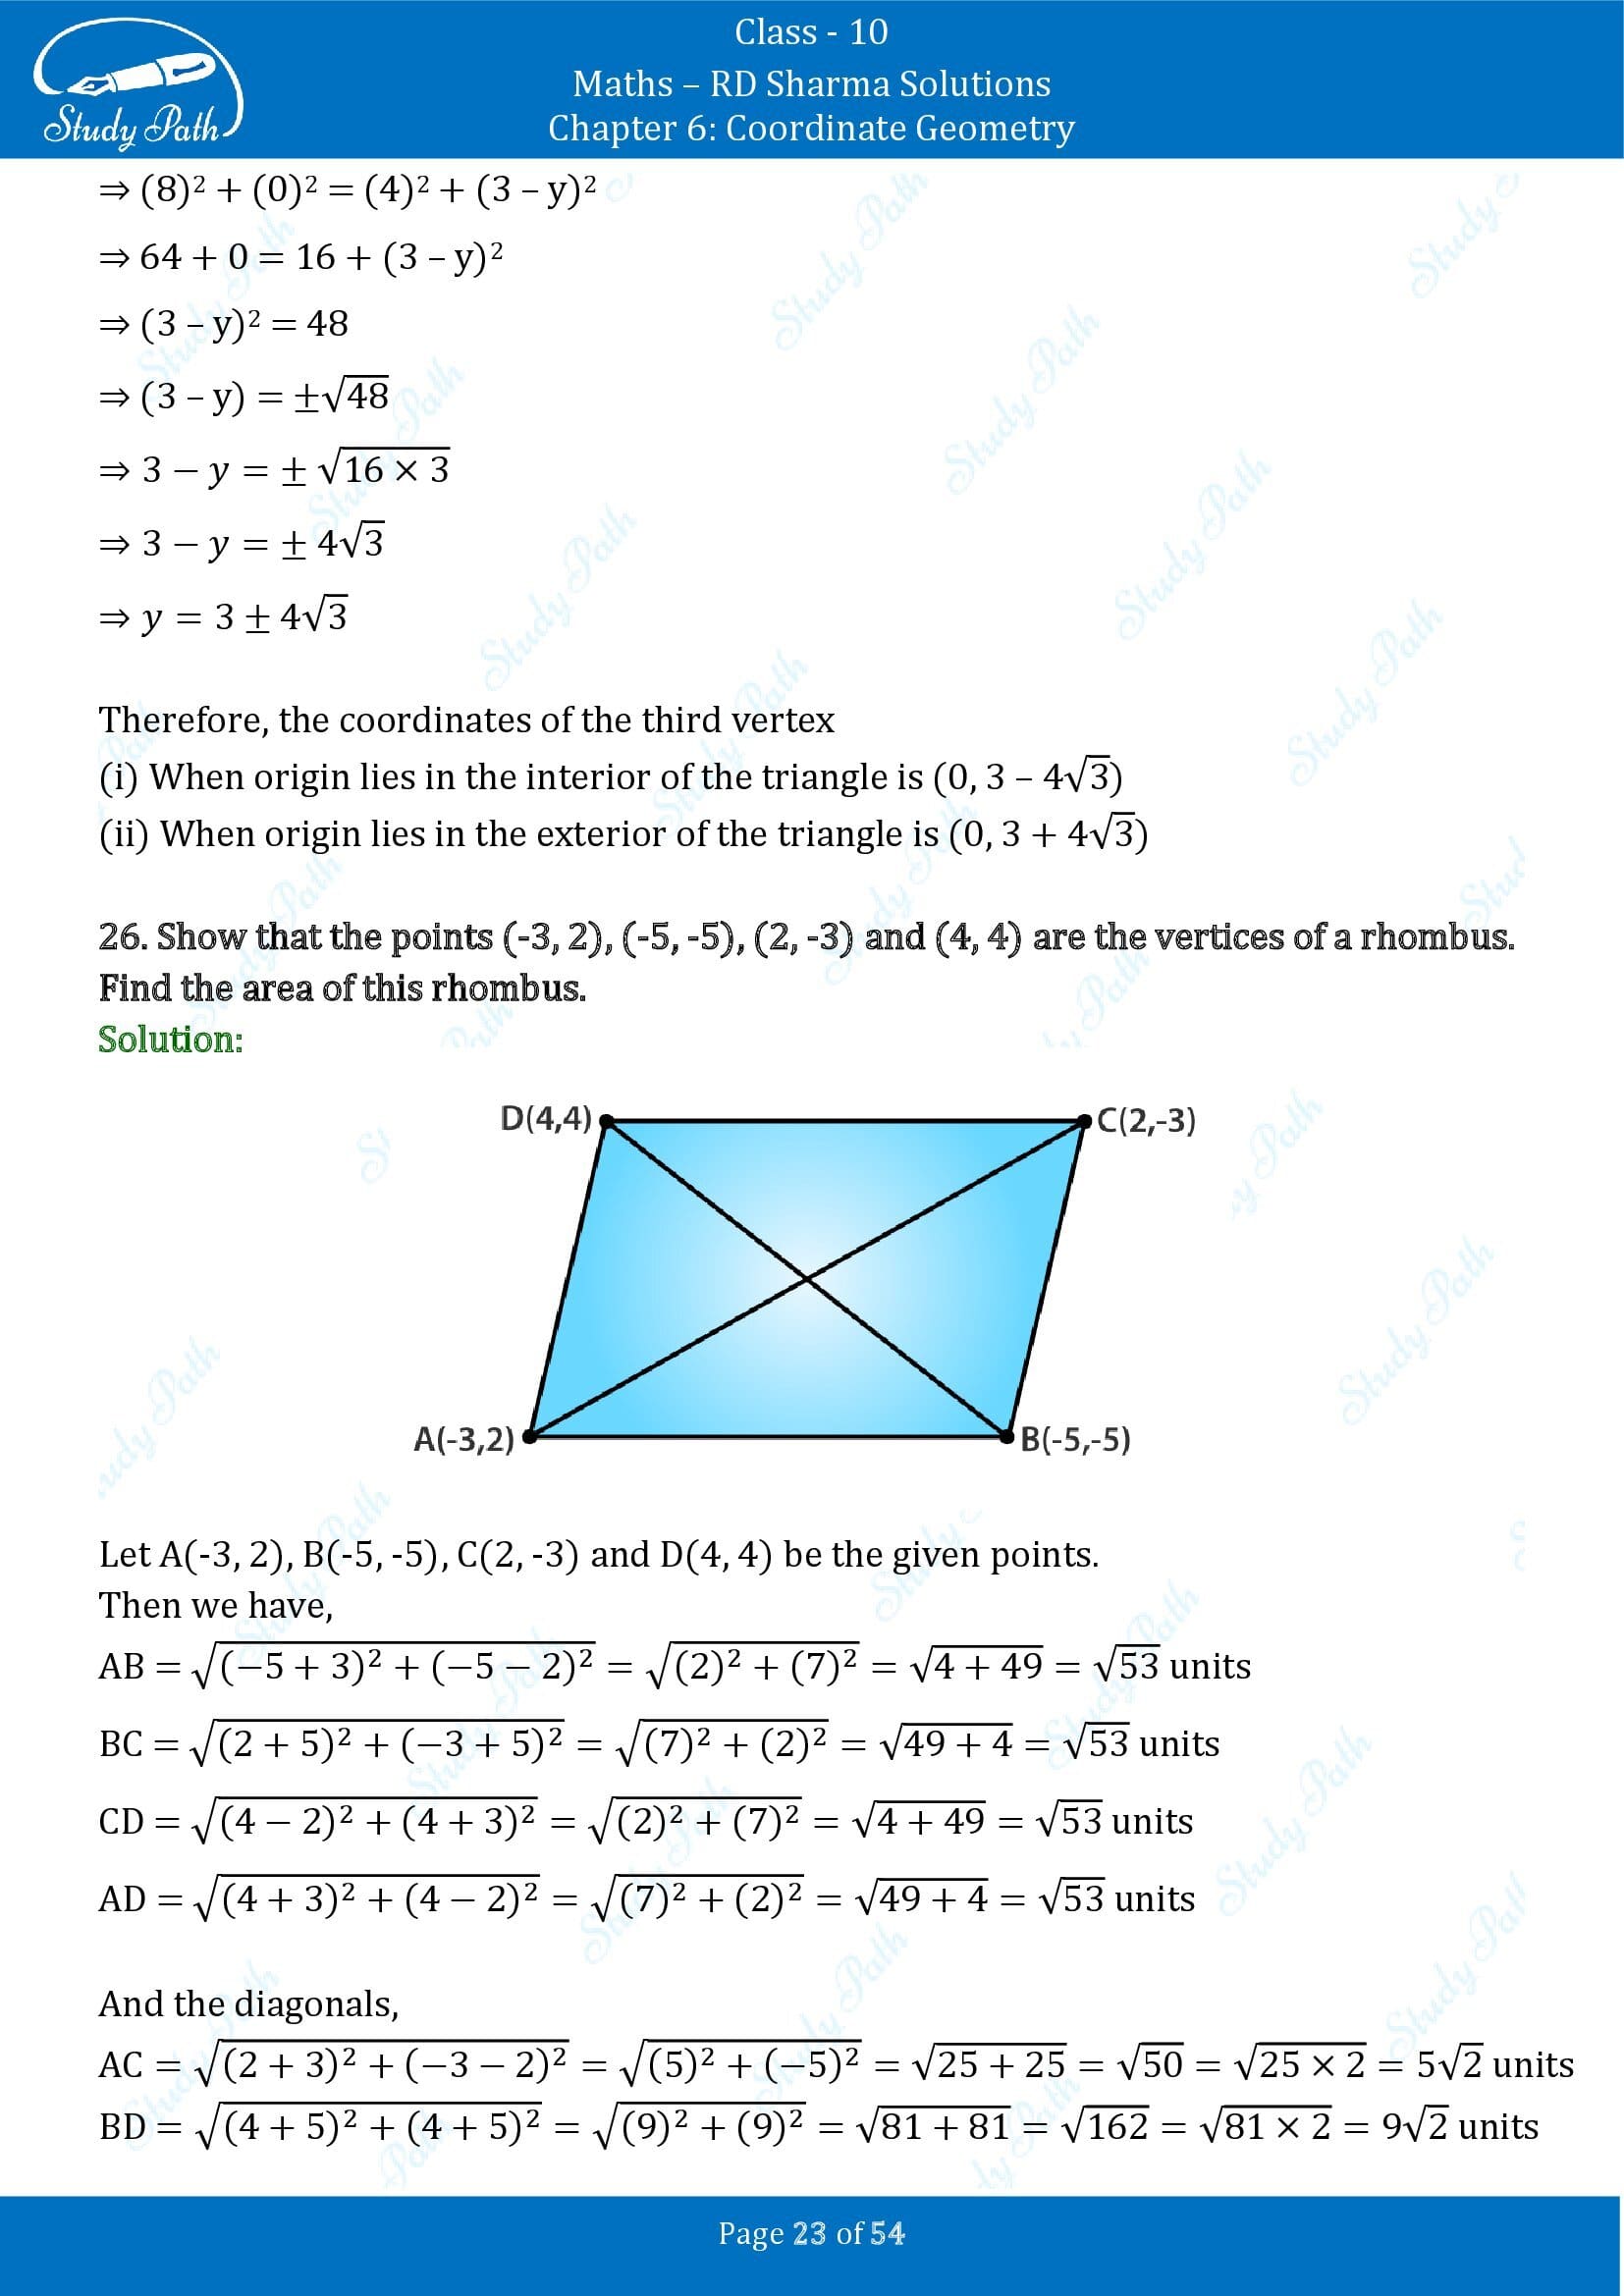 RD Sharma Solutions Class 10 Chapter 6 Coordinate Geometry Exercise 6.2 0023